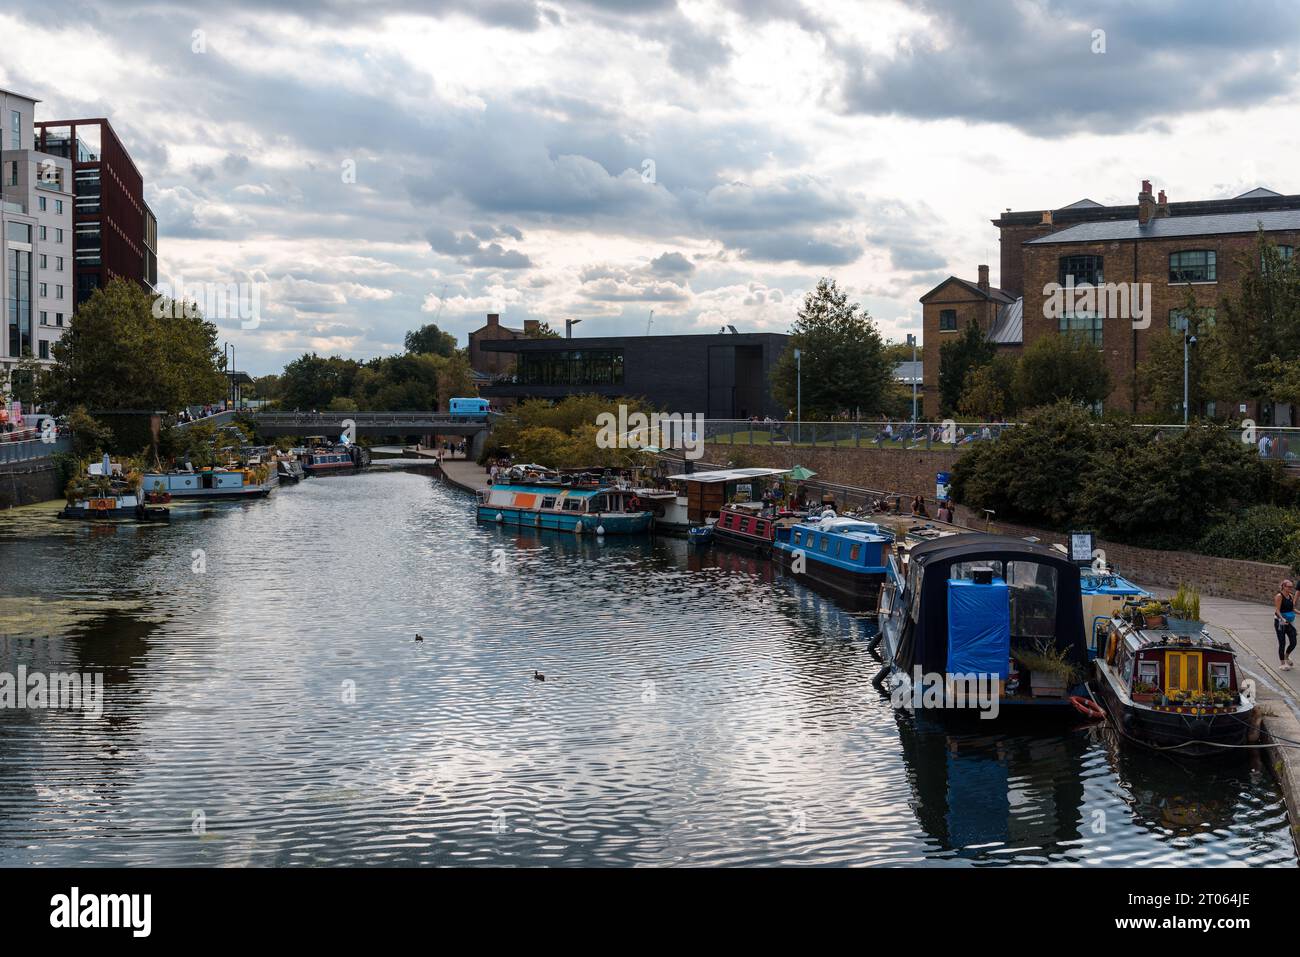 London, UK - August 25, 2023: Regents Canal at Kings Cross. People enjoying the walk by the canal Stock Photo